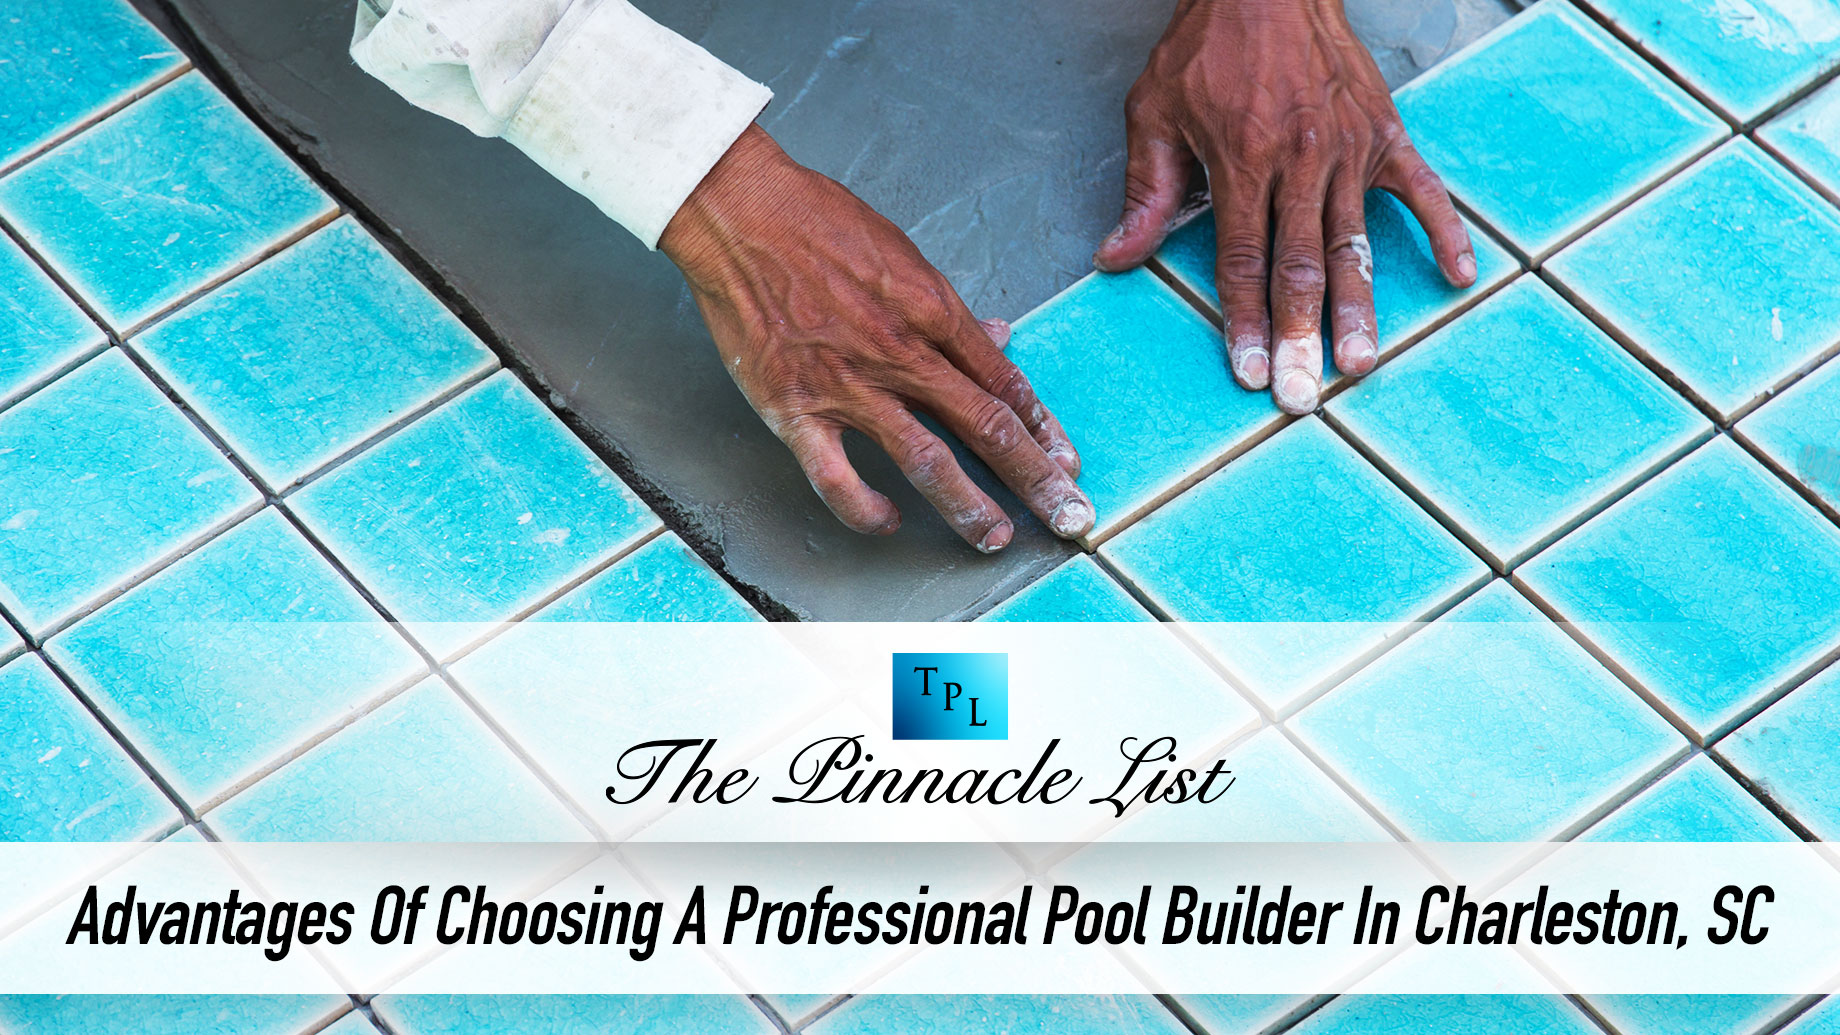 Advantages Of Choosing A Professional Pool Builder In Charleston, SC